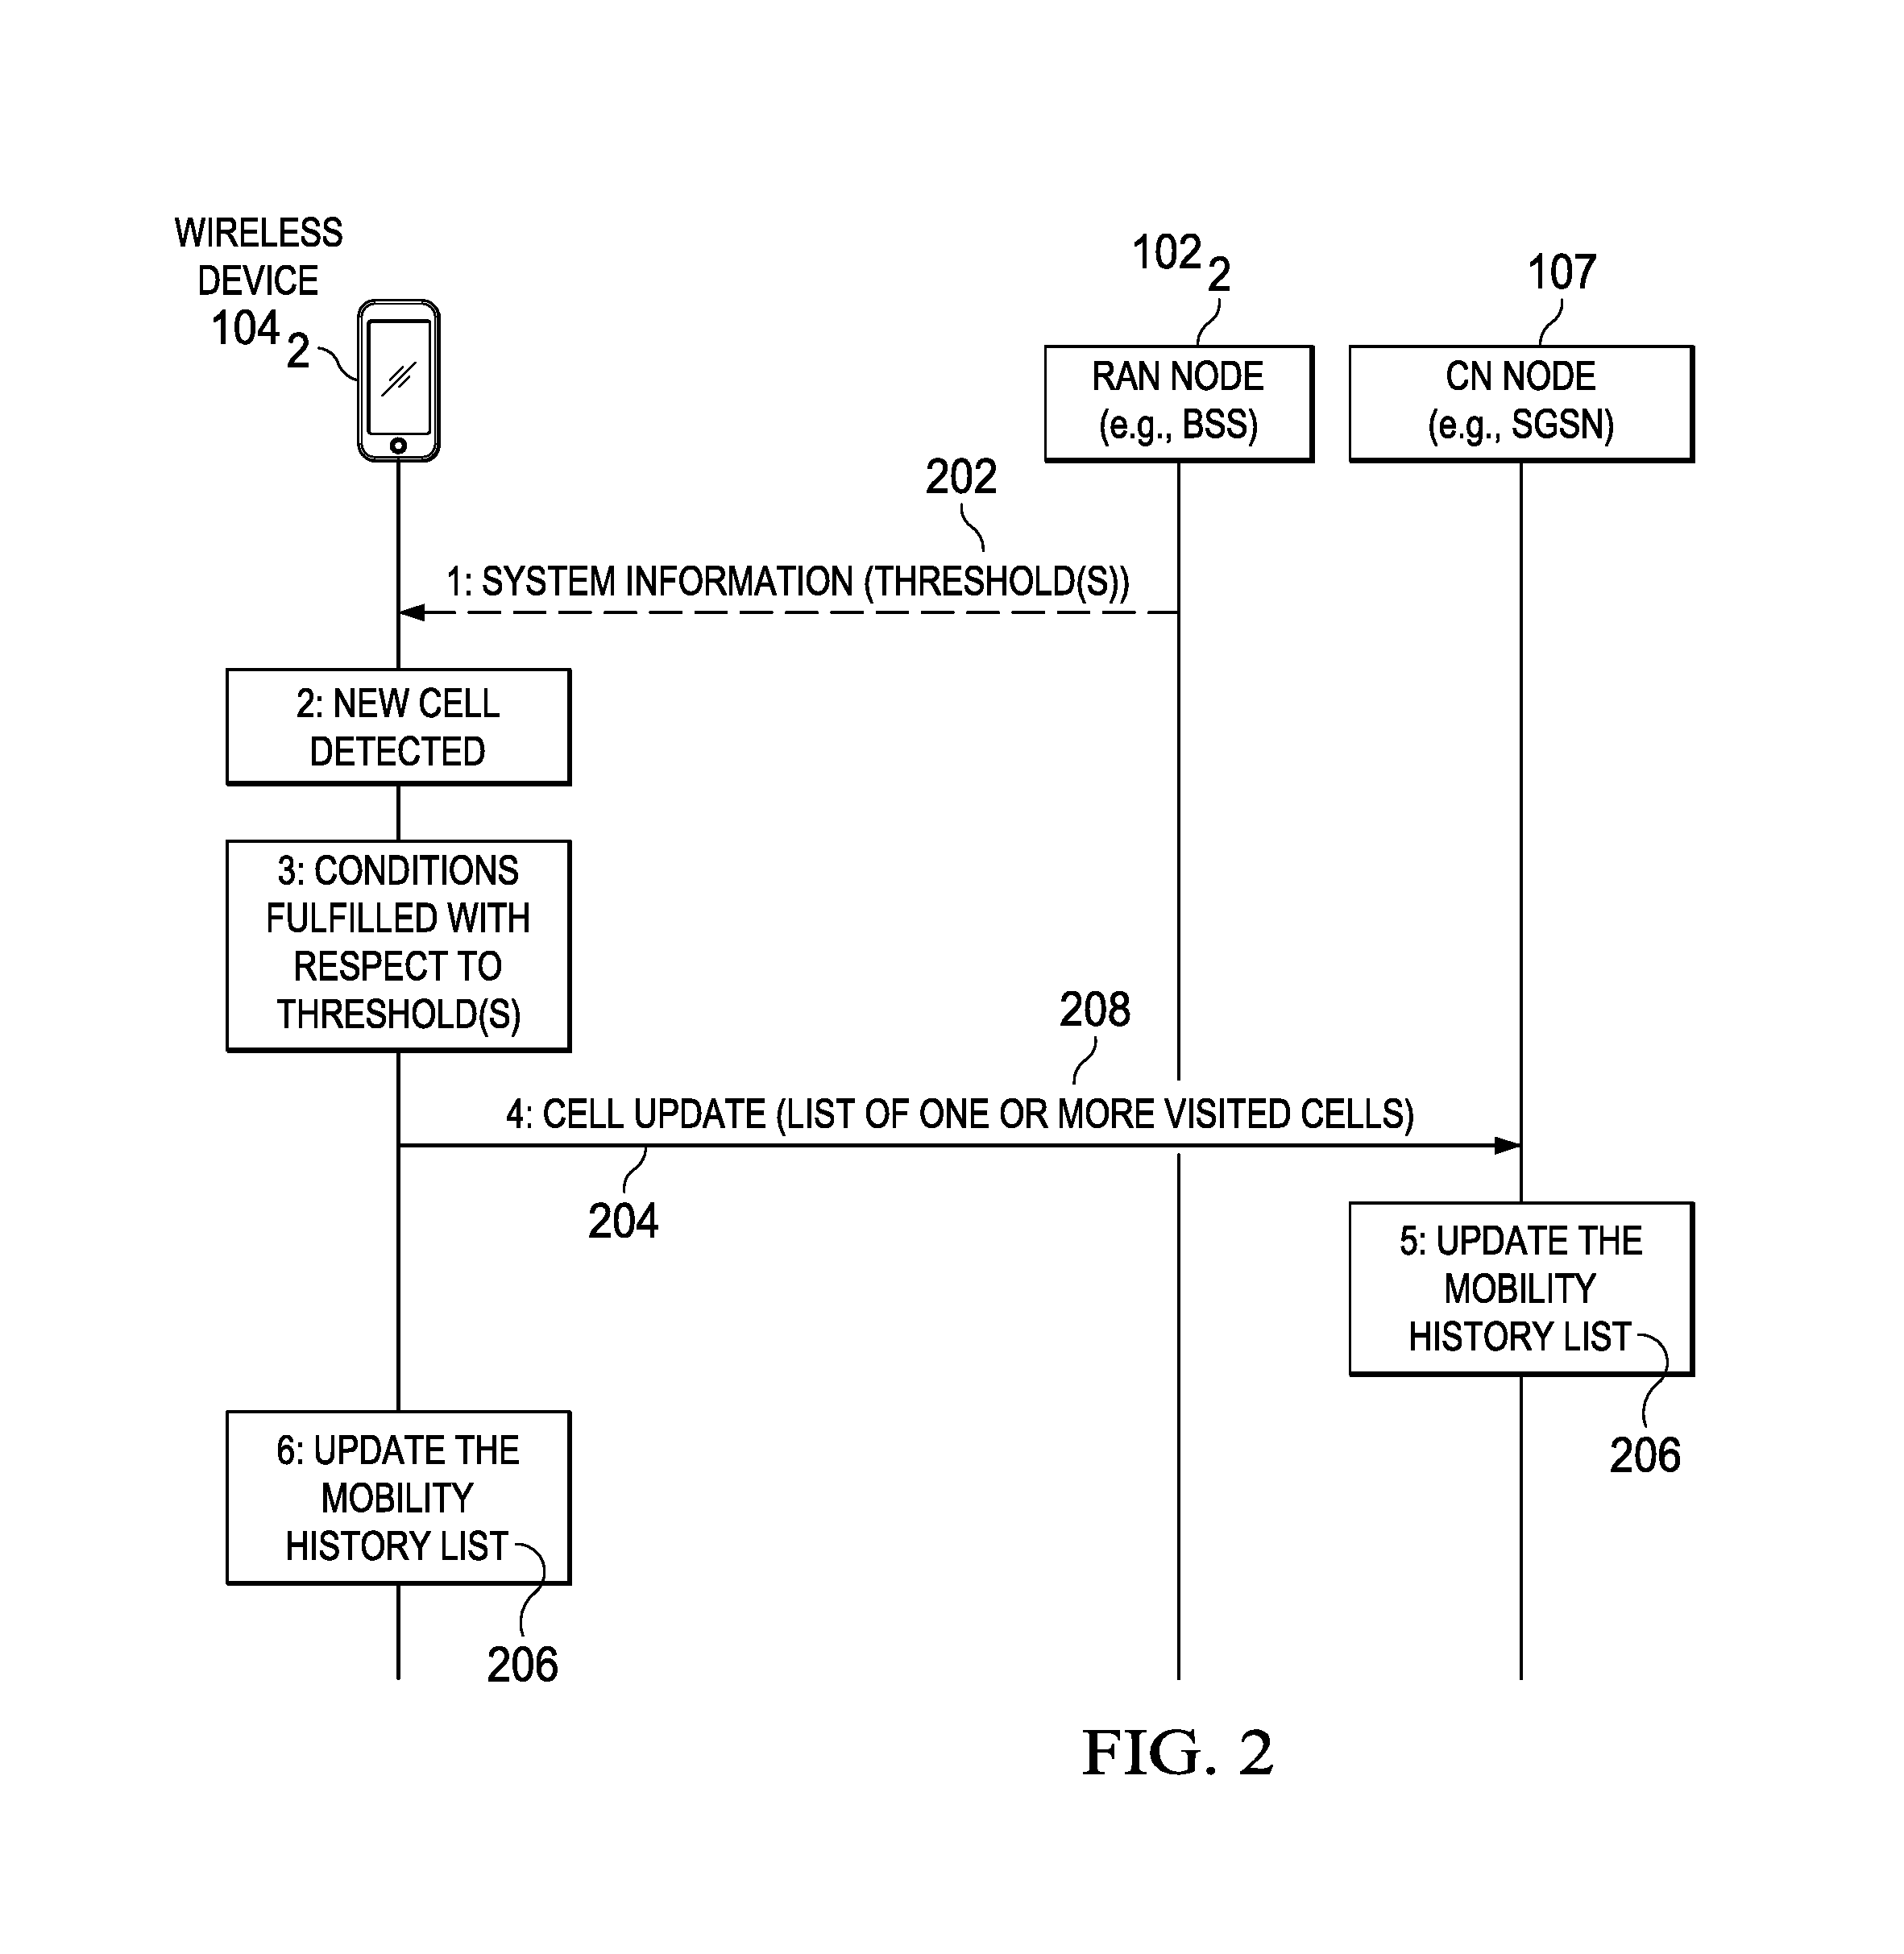 Wireless device determination that conditions are fullfilled prior to utilizing mobility history list